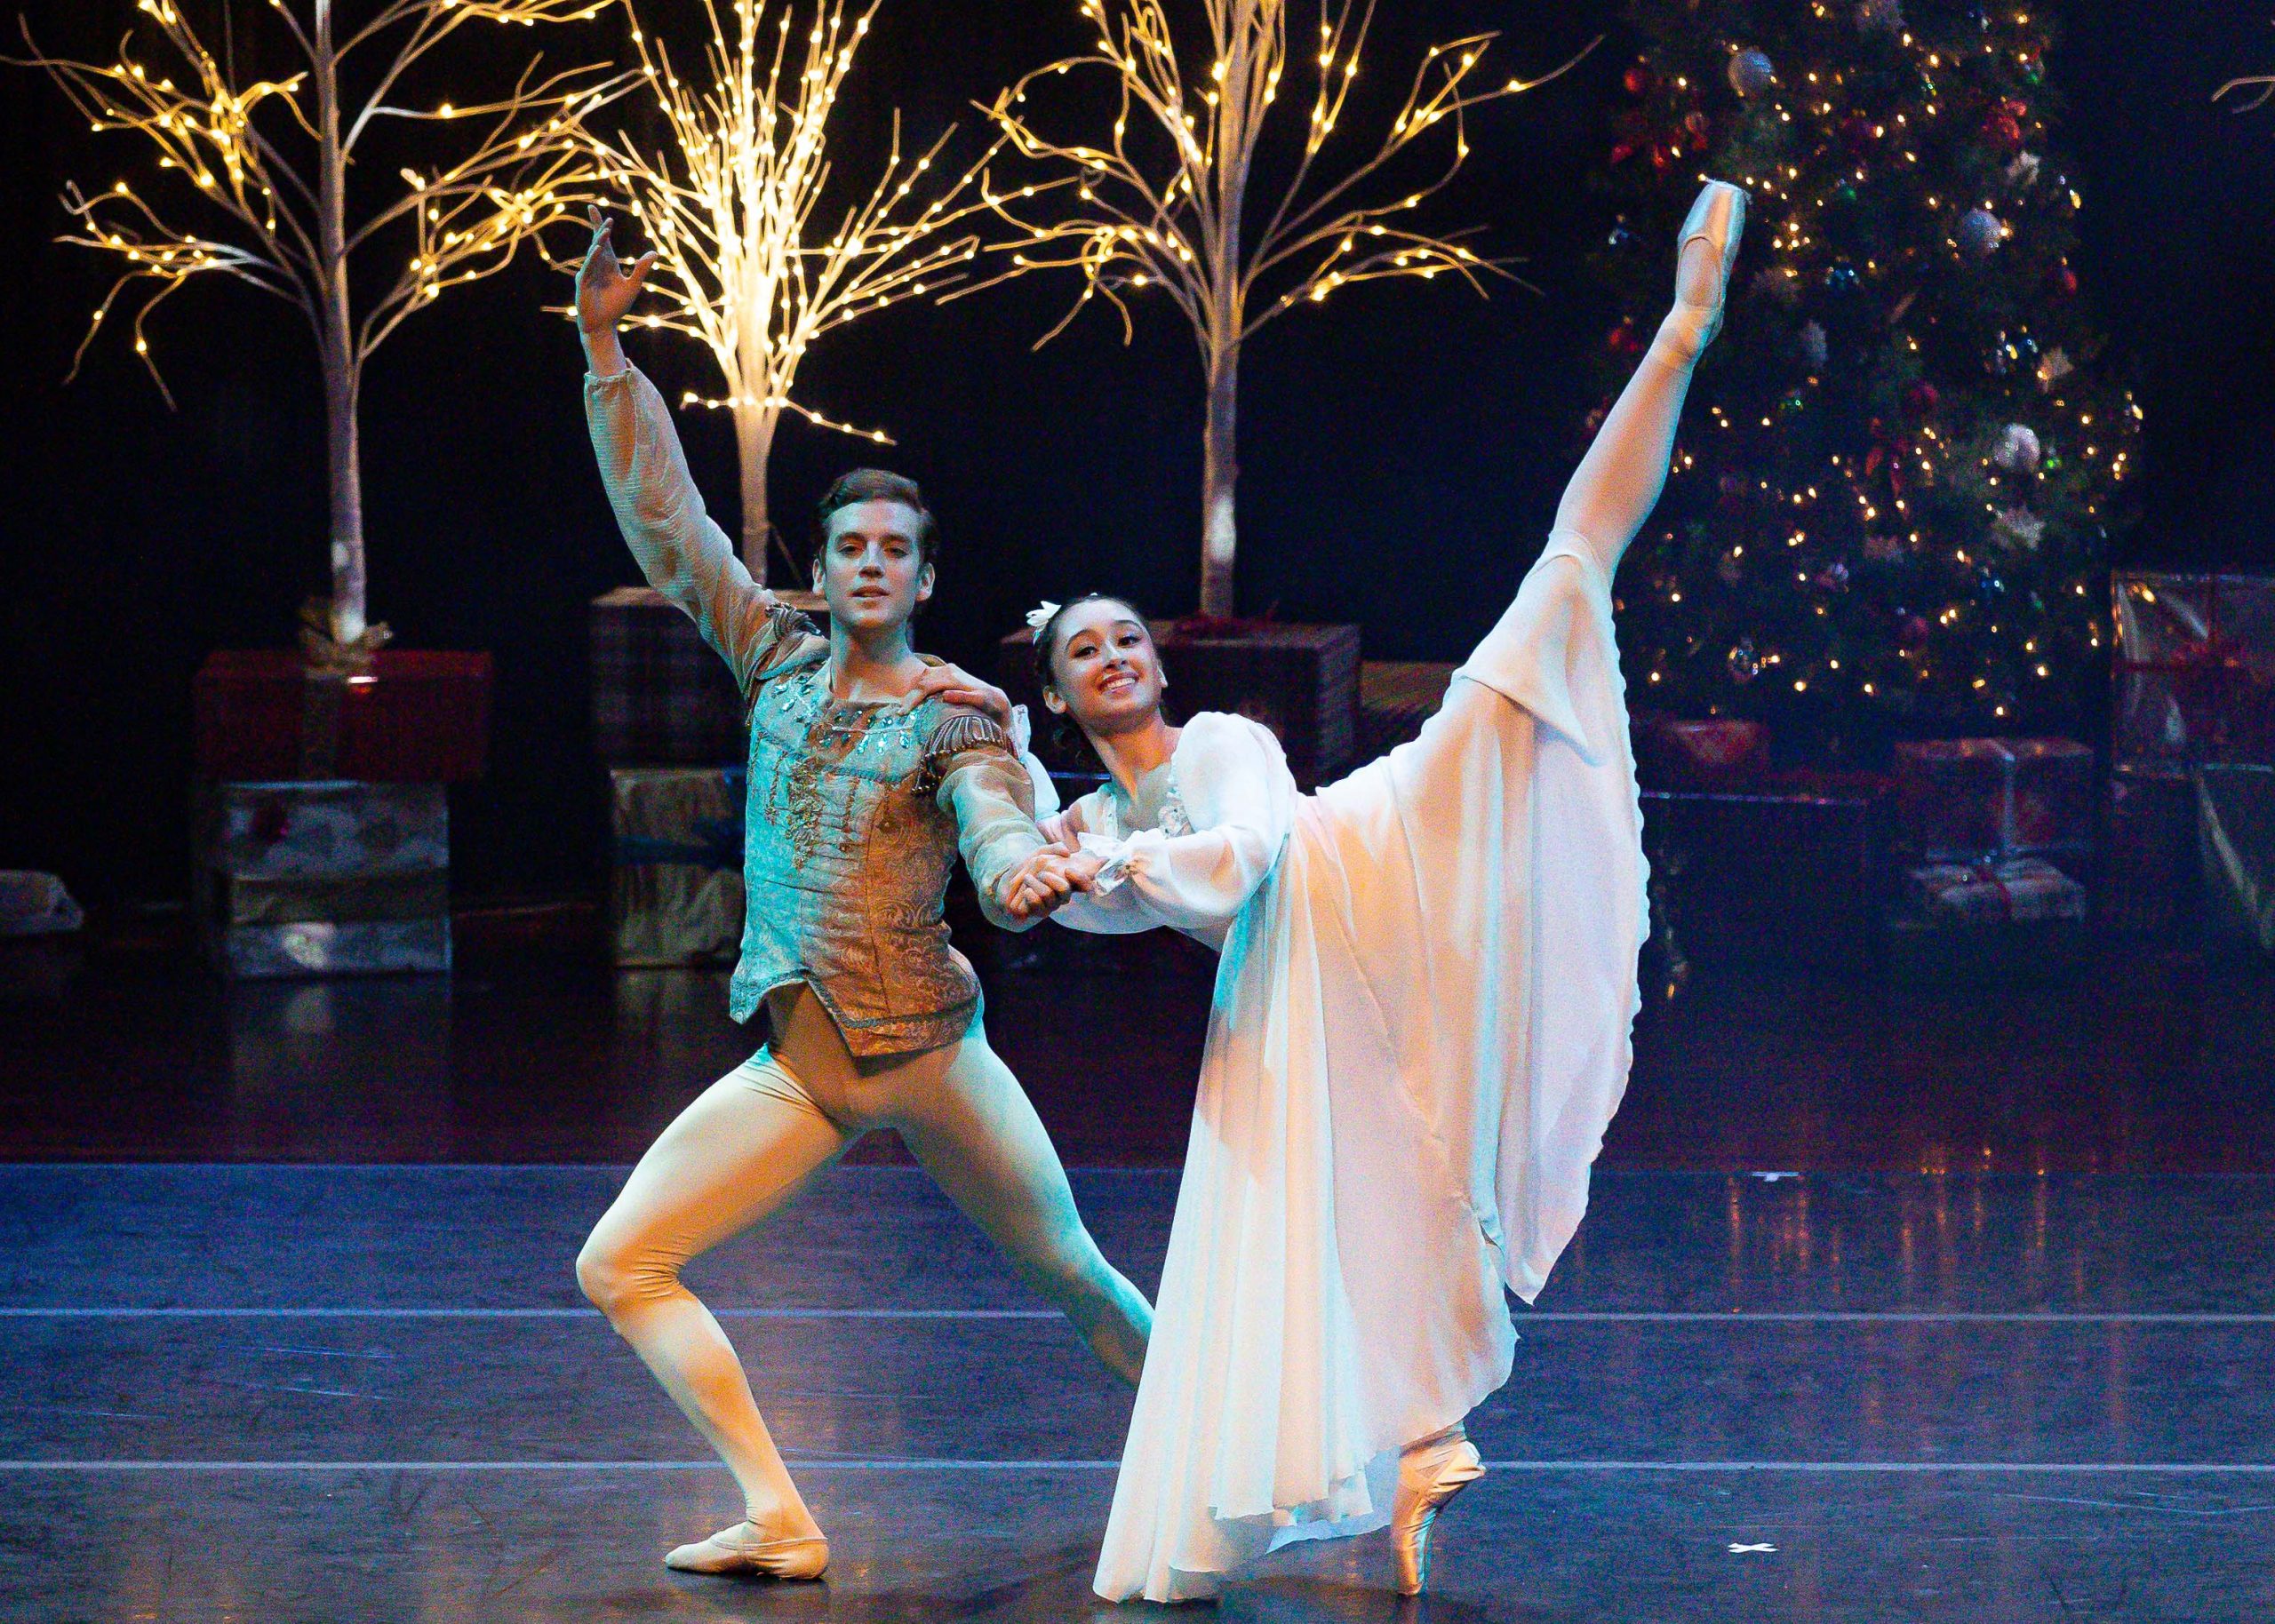 L-R Sabastian Vinet & Aurora Ausserer. Courtesy of Indiana Ballet Conservatory. Used with permission.